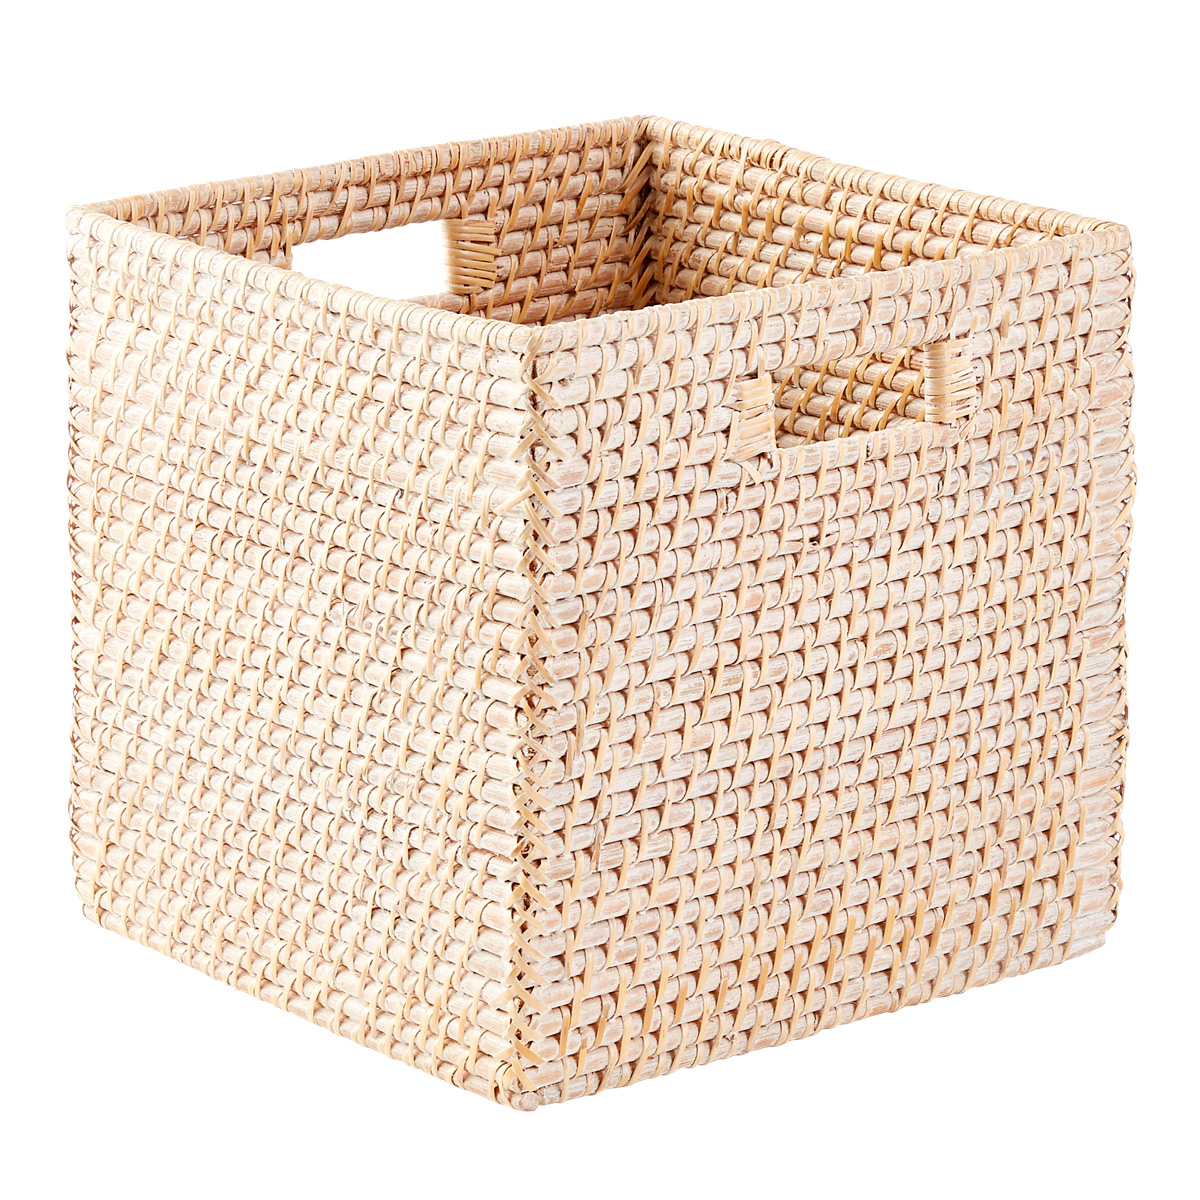 https://www.containerstore.com/catalogimages/409964/10077178_Med_Rattan_Cube_w_Handles_W.jpg